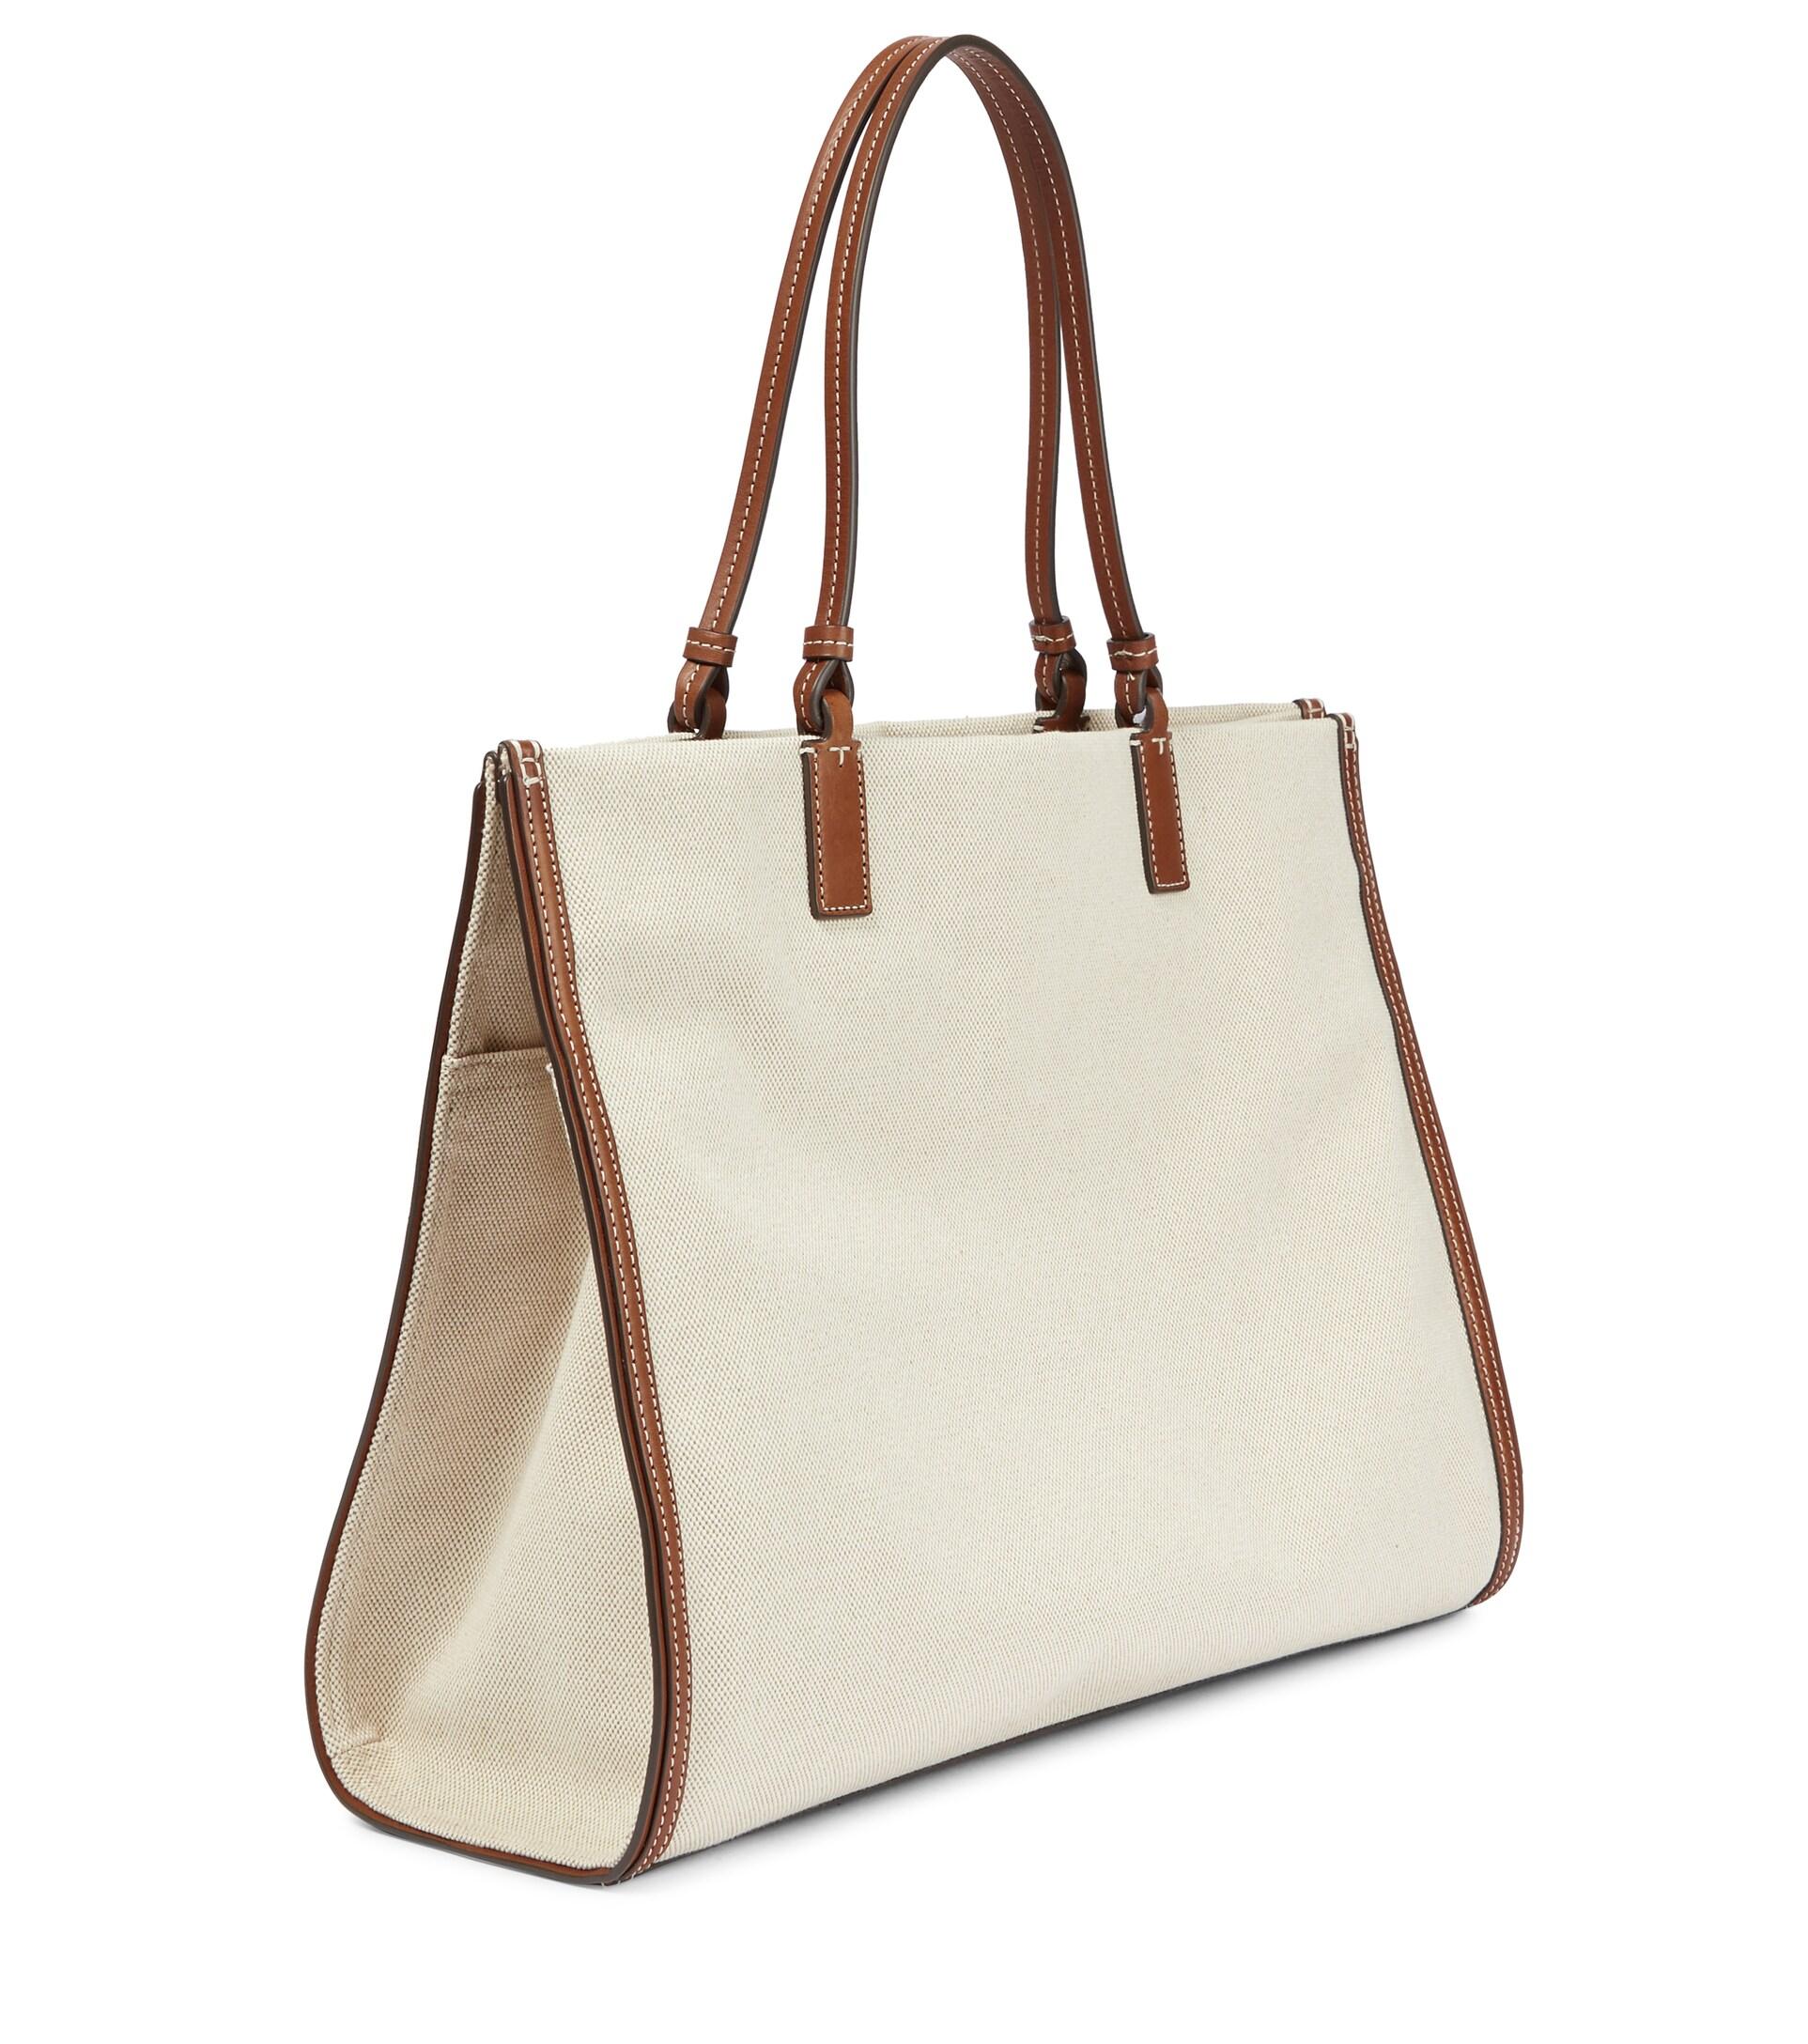 Tory Burch Ella Leather-trimmed Canvas Tote in Natural | Lyst